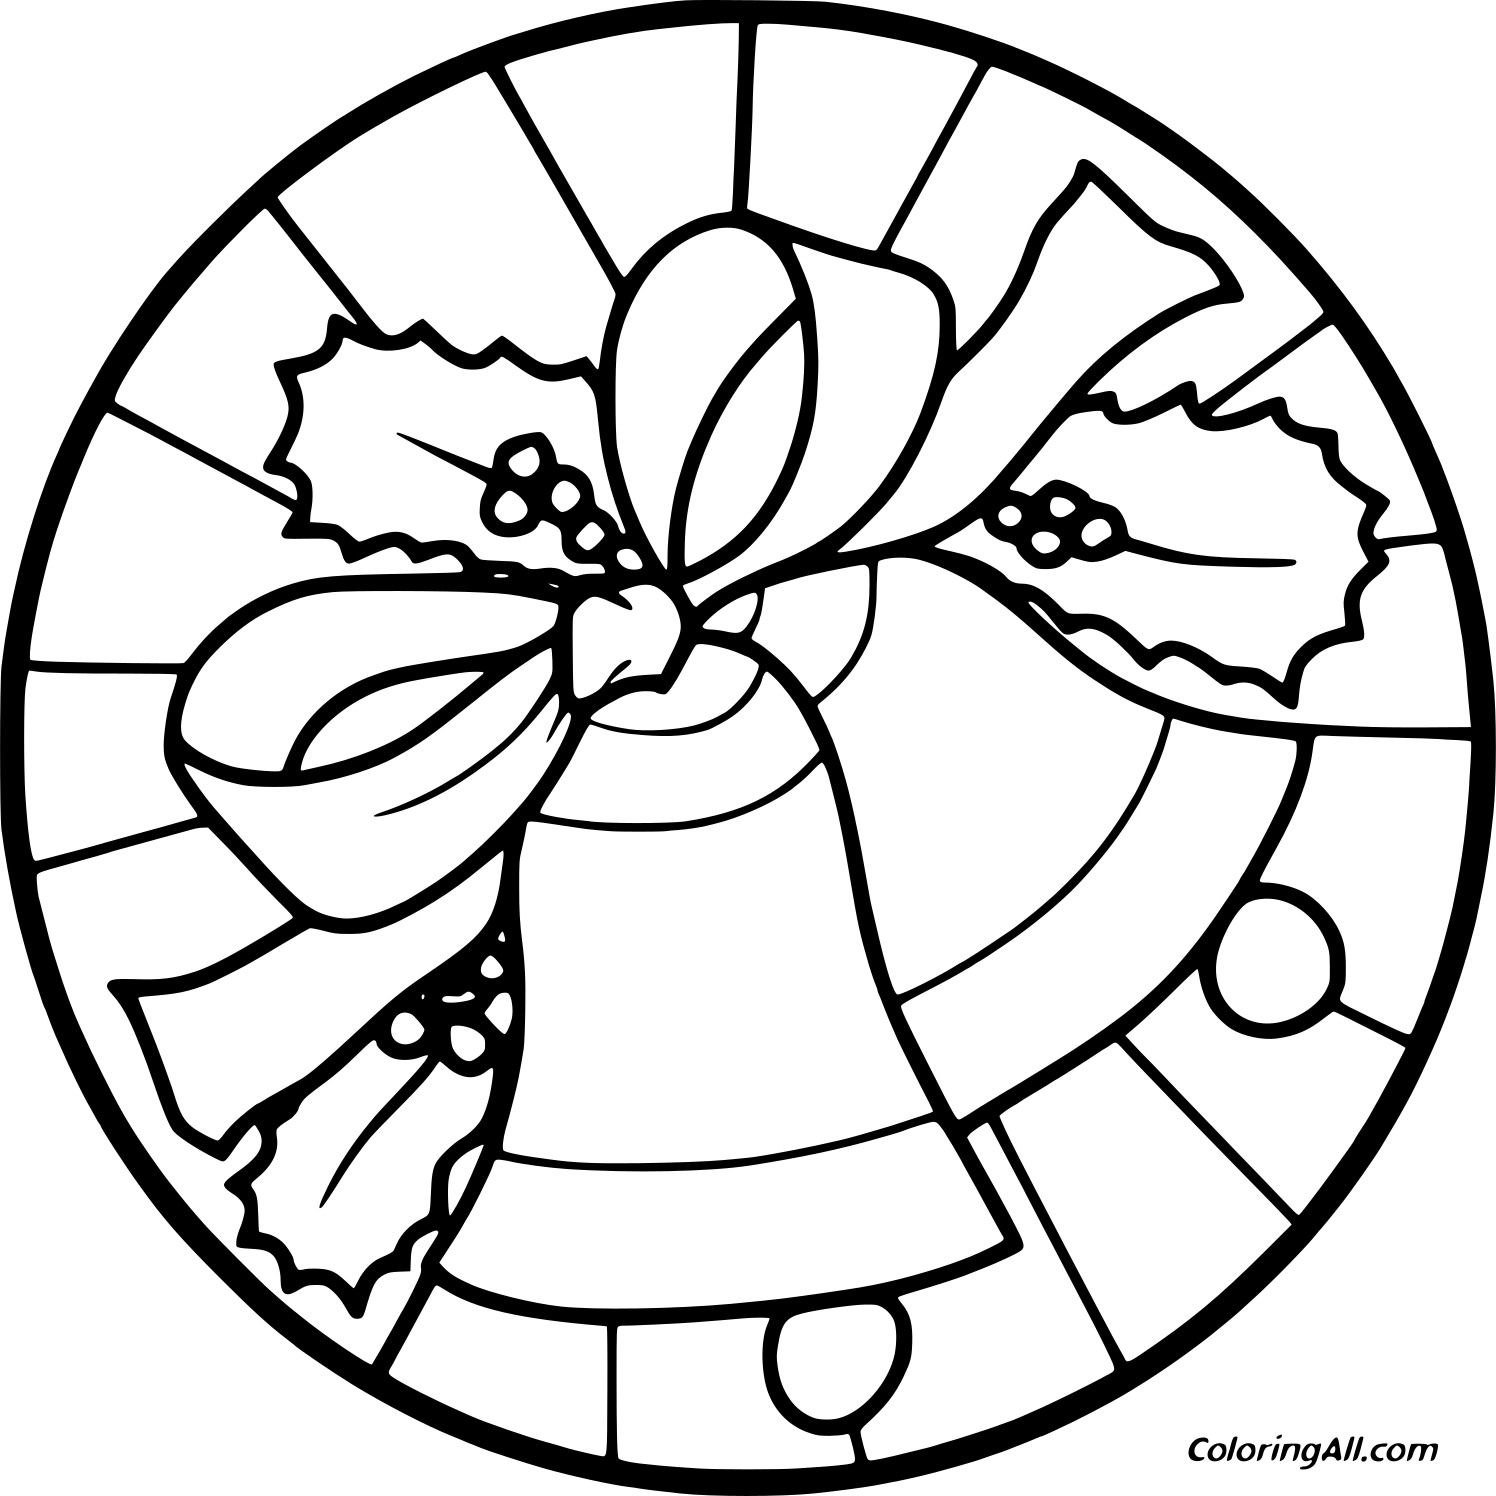 Bell And Holly In Circle Image For Kids Coloring Page